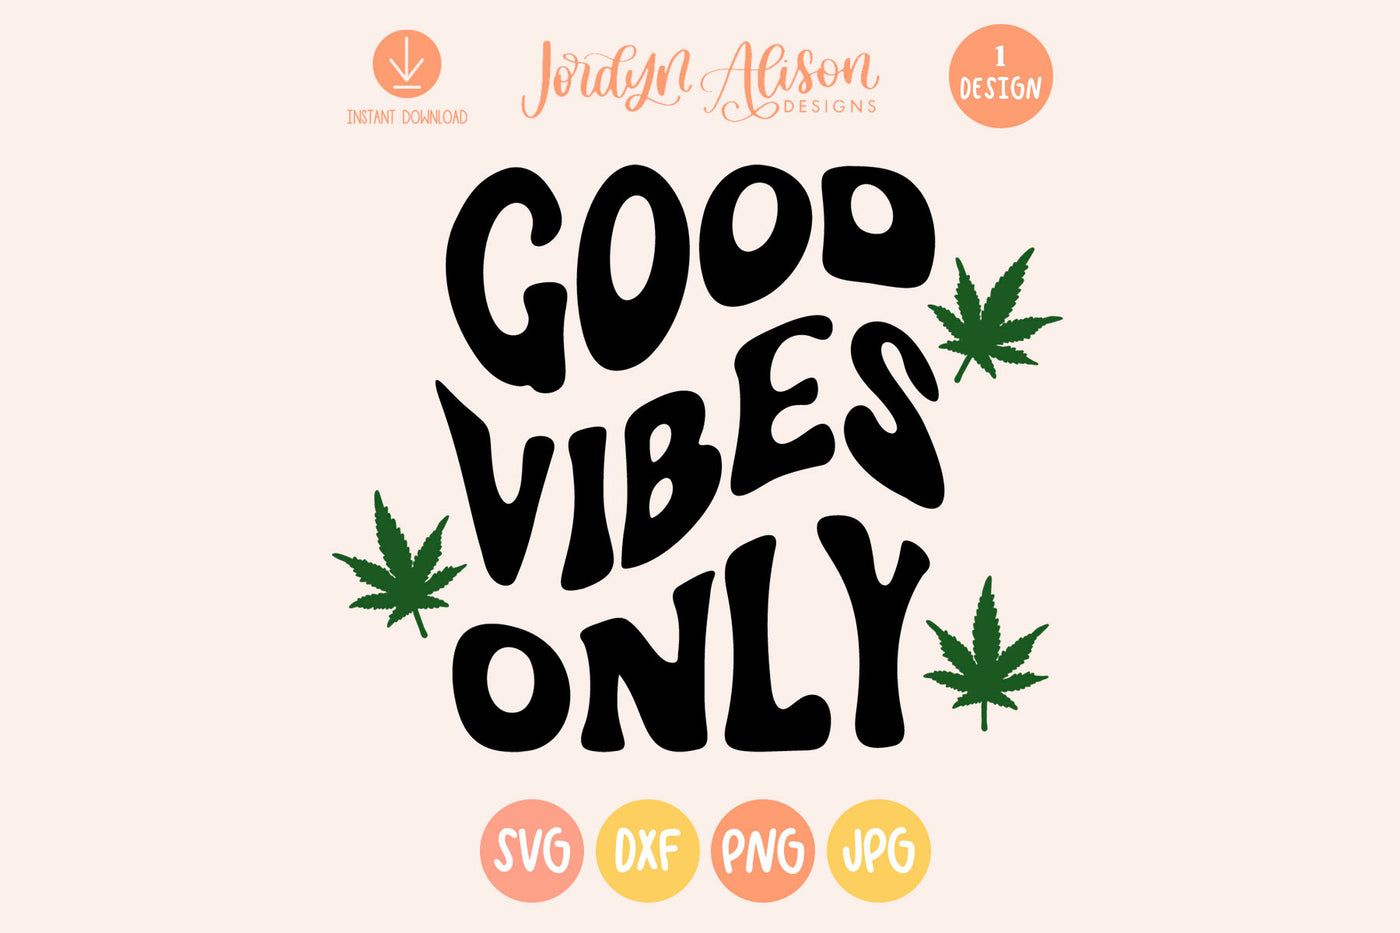 Good Vibes Only Cannabis SVG | Stoner SVG | Weed SVG